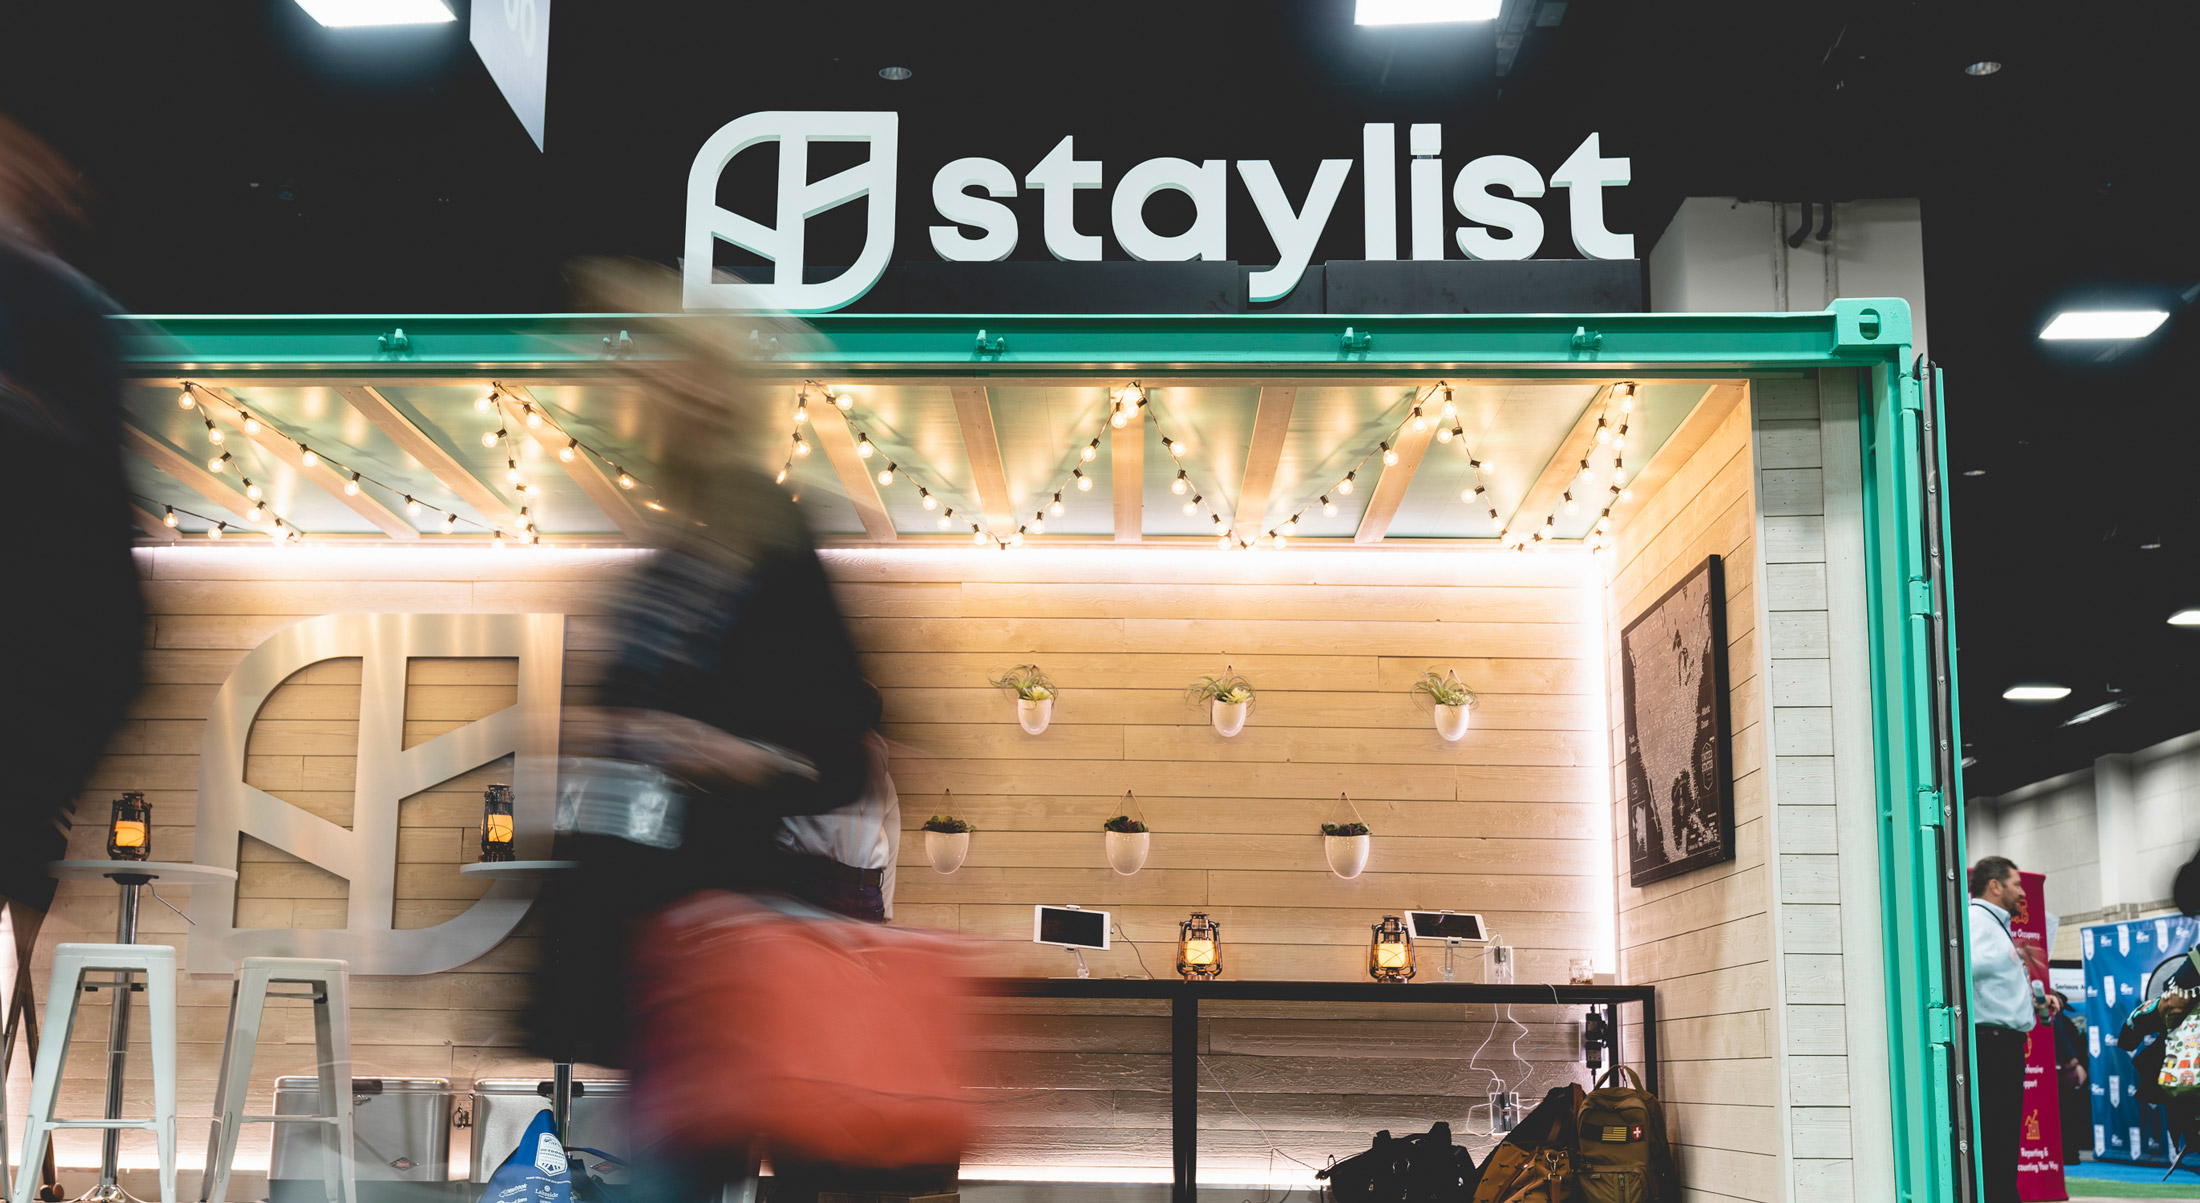 Staylist at conference